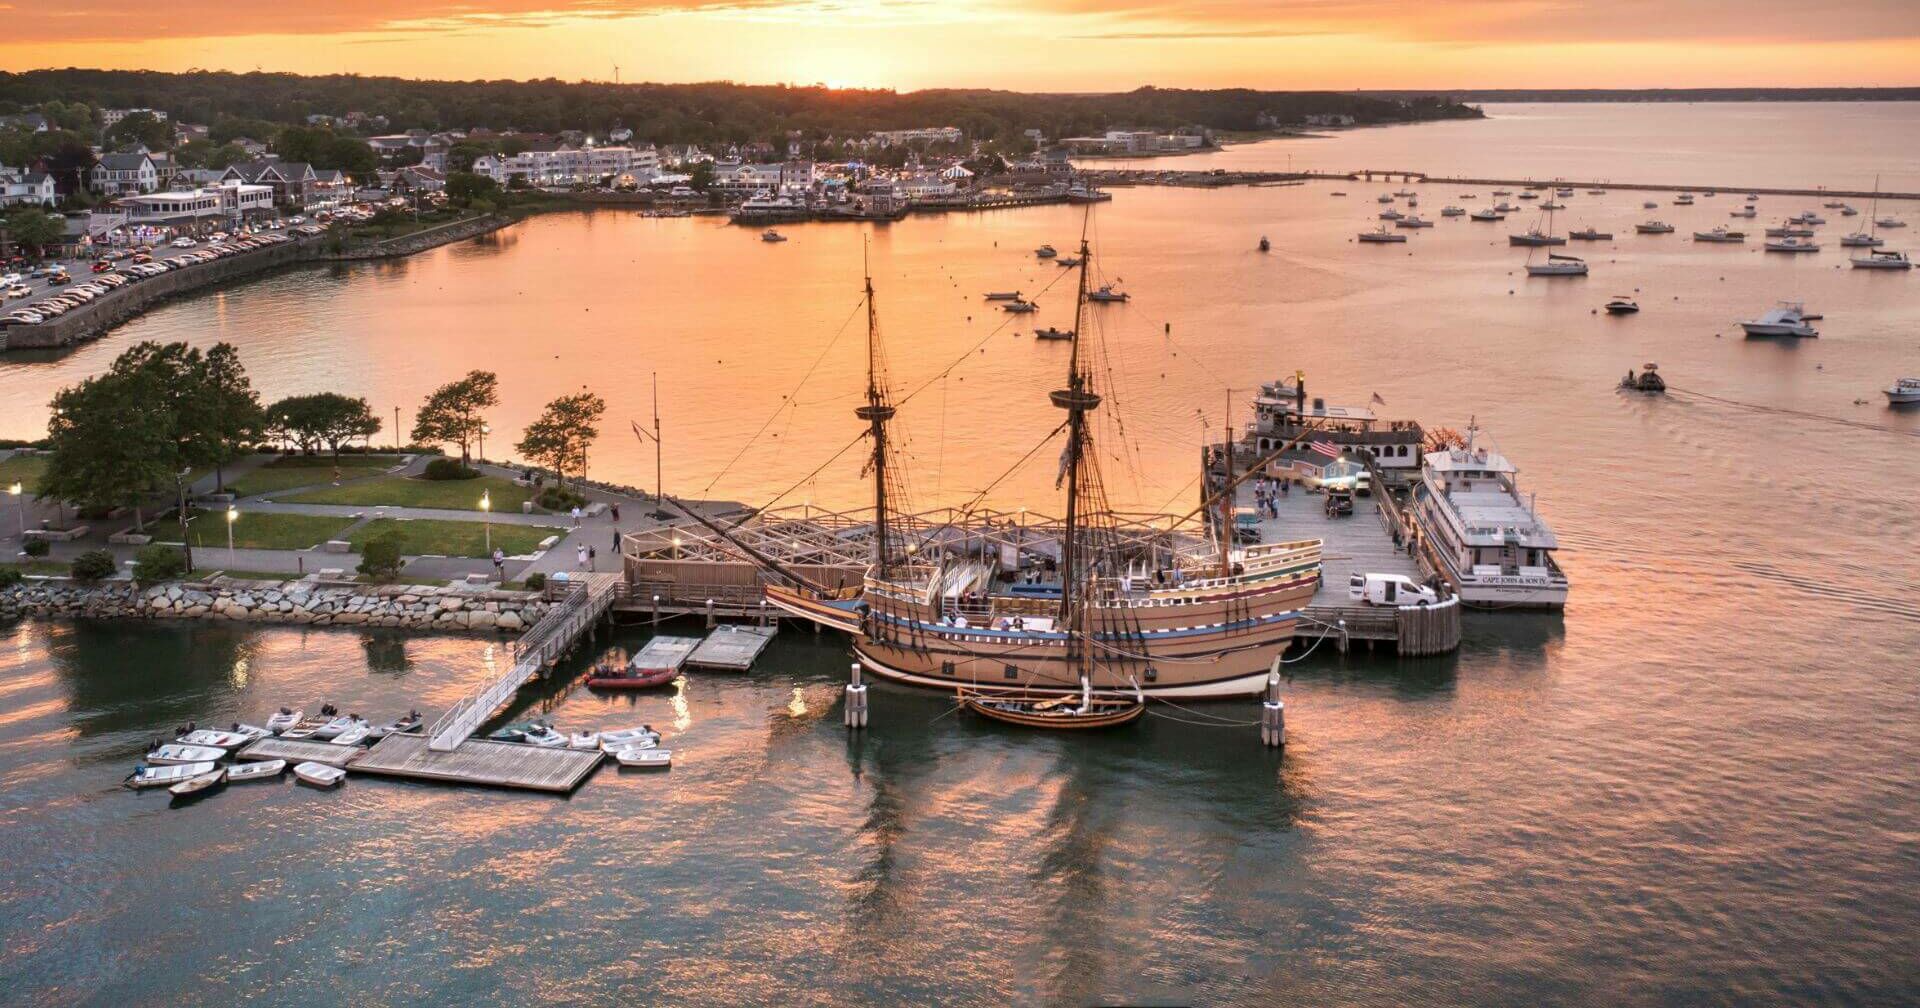 Ariel view of Mayflower II docked in downtown Plymouth at sunset